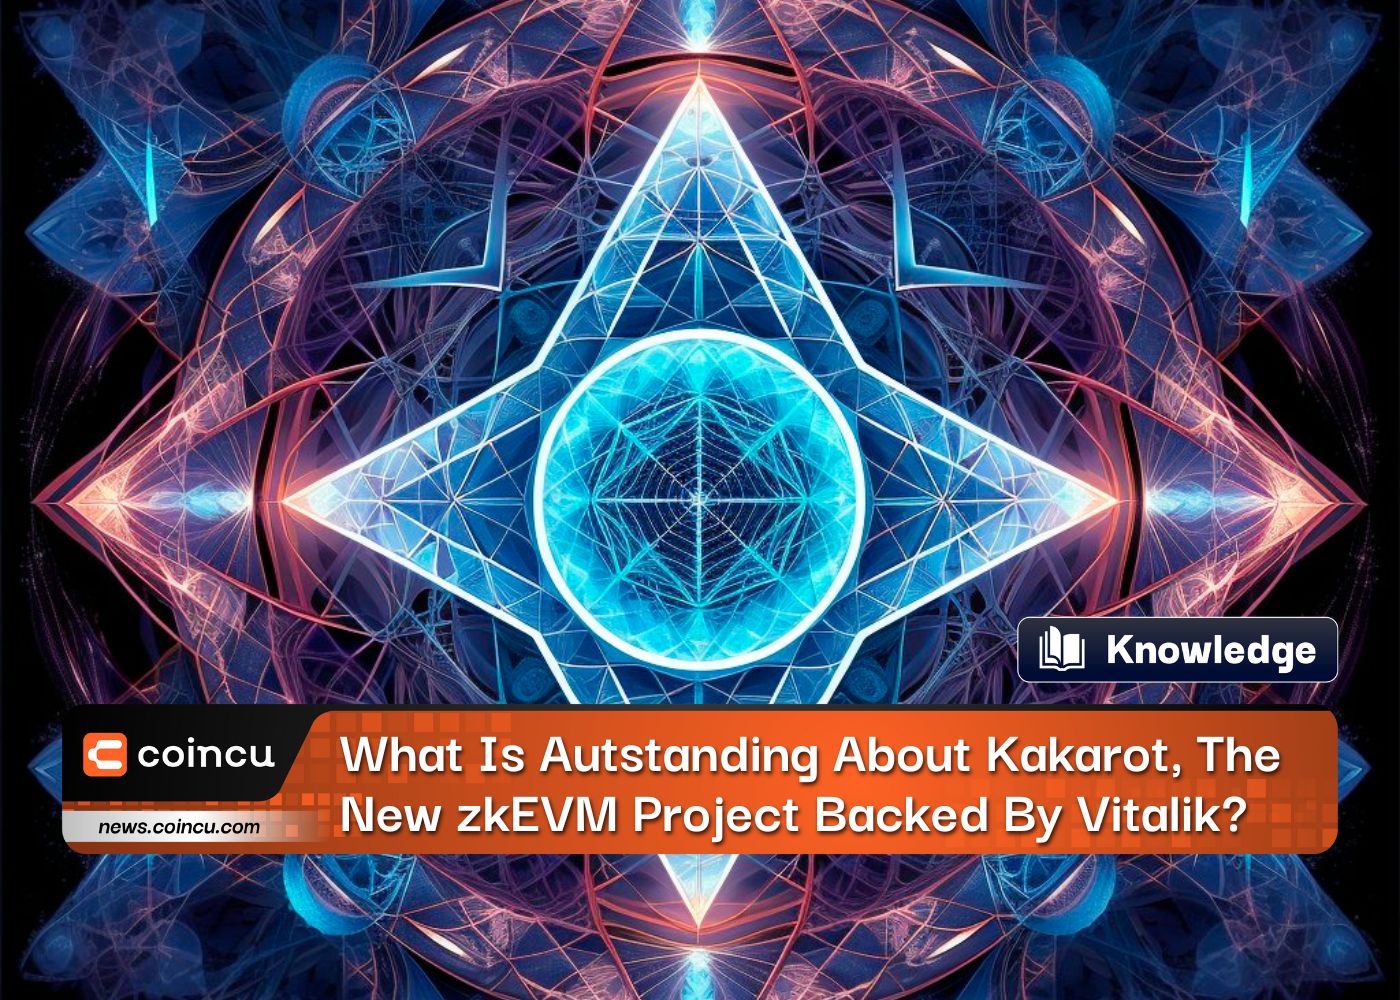 What Is Autstanding About Kakarot, The New zkEVM Project Backed By Vitalik?